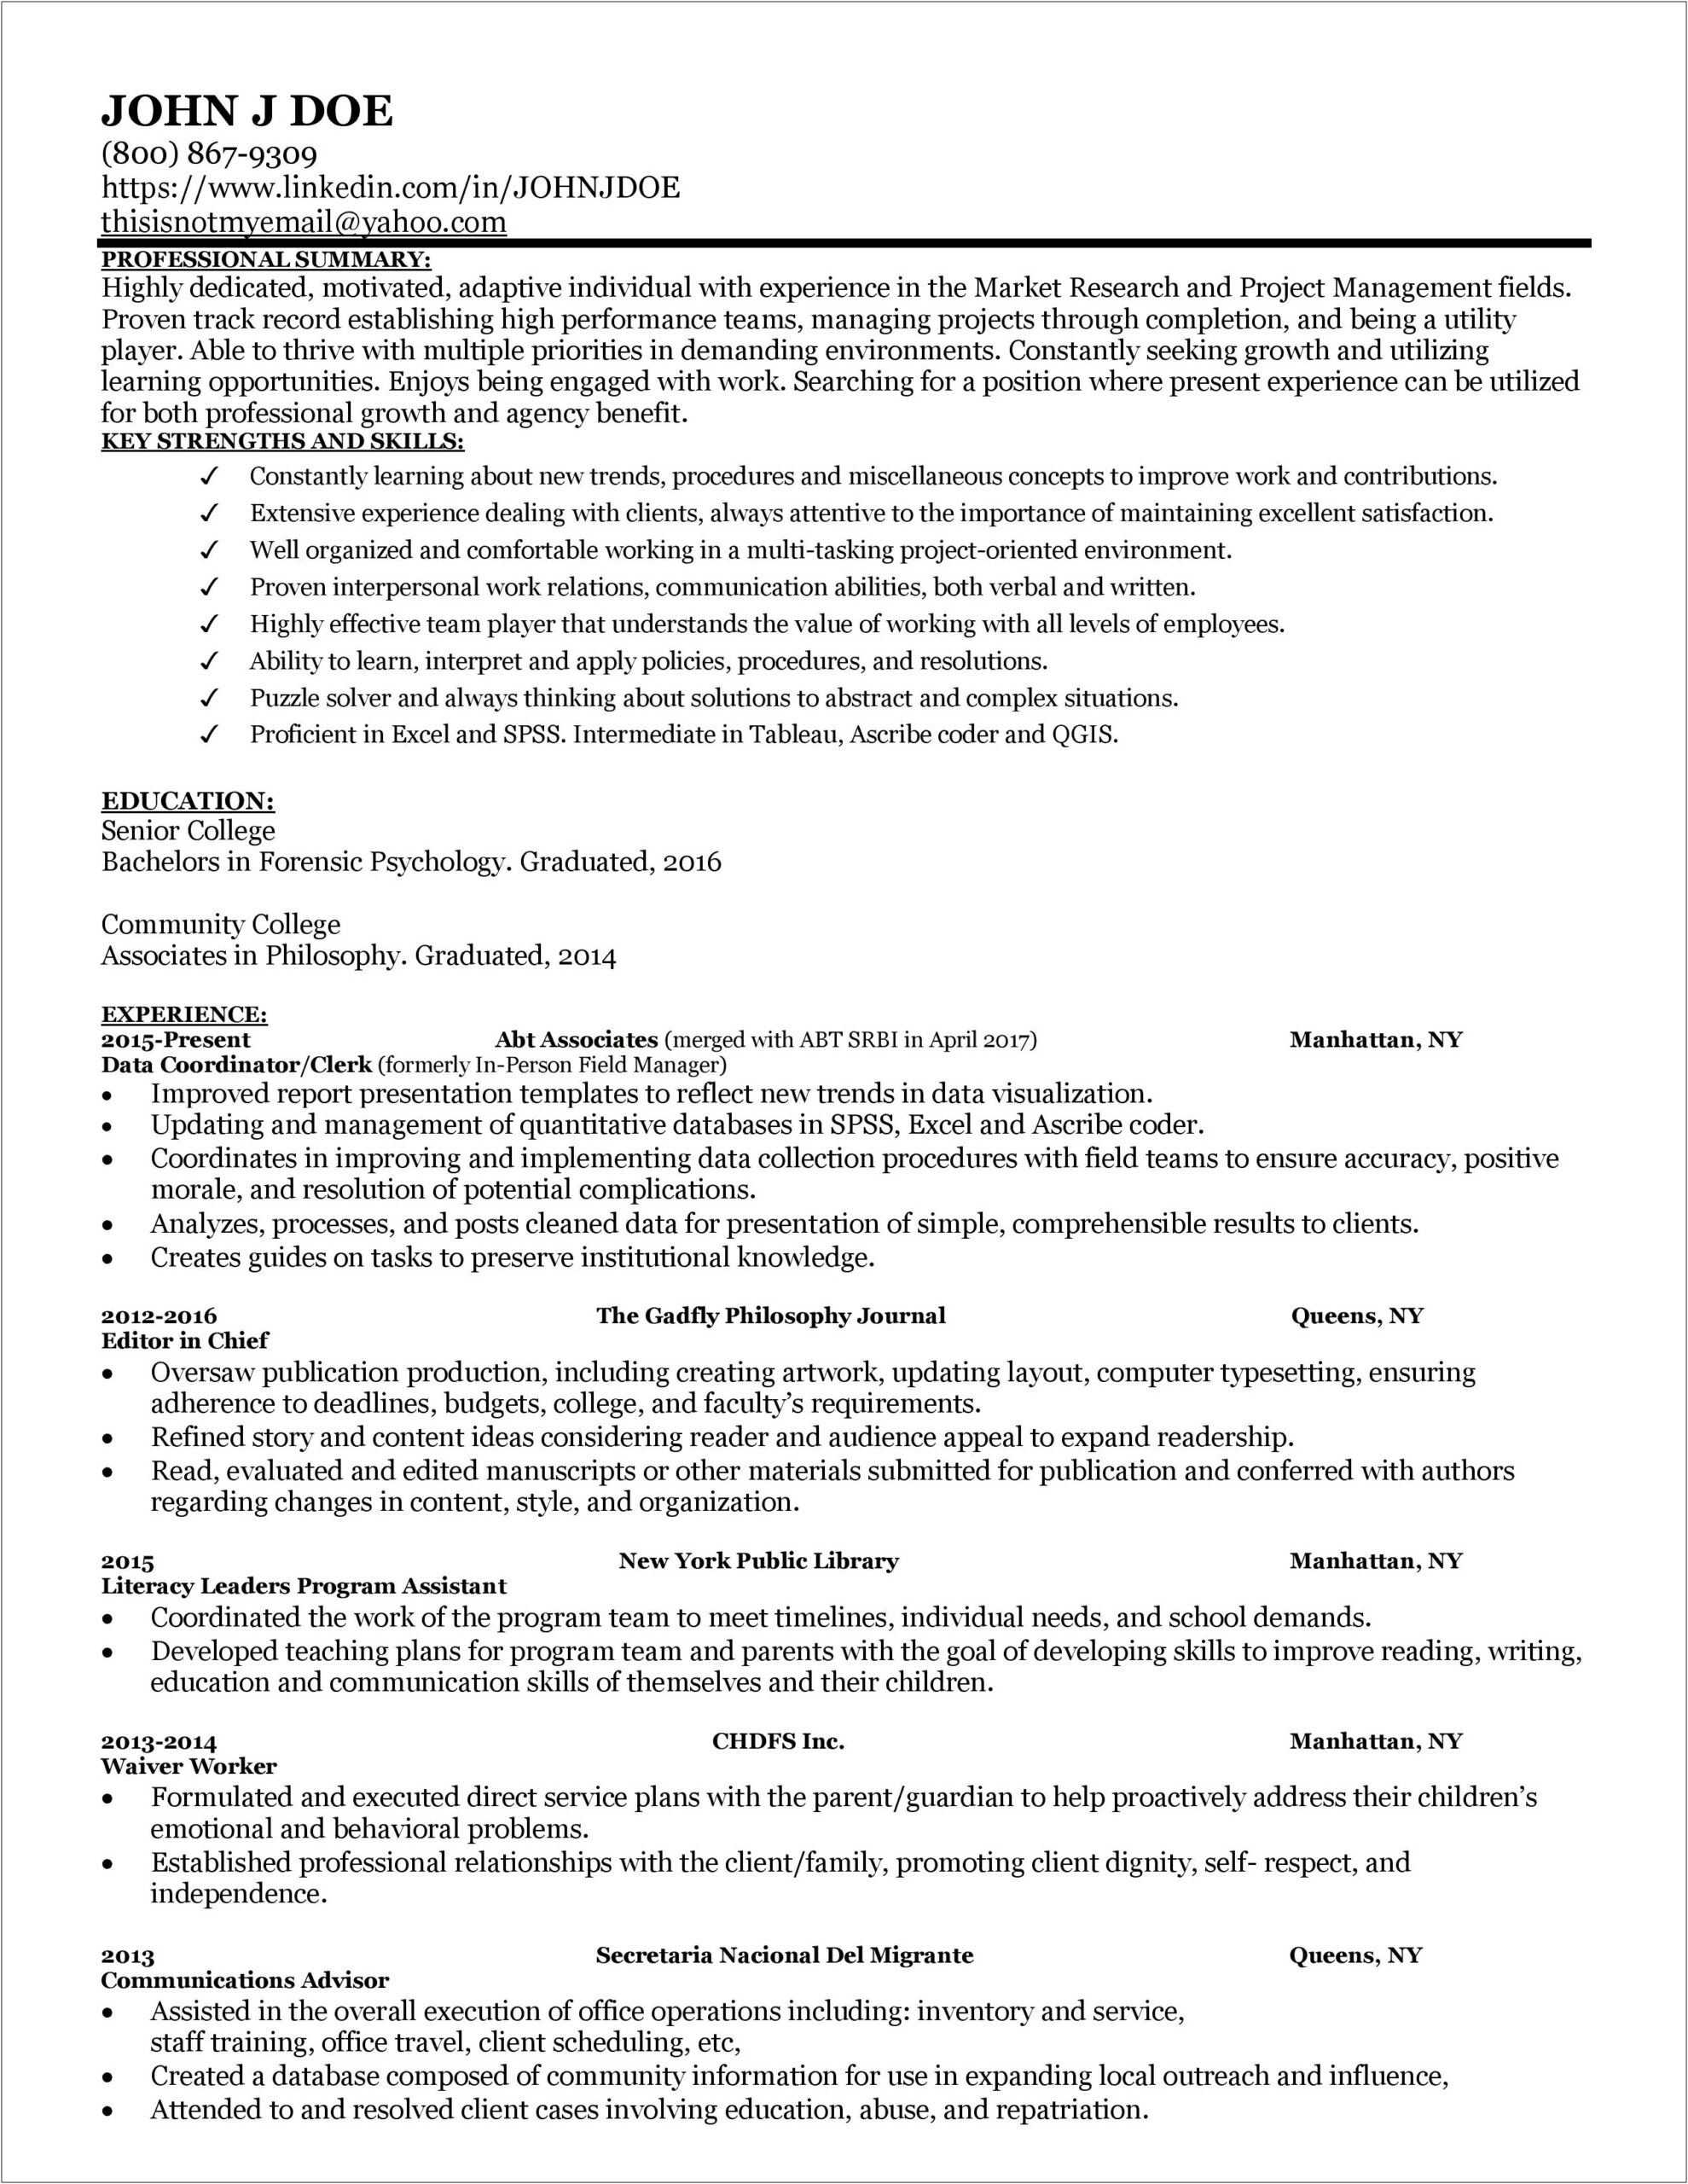 Writing A Resume Work Experience Bullet Points Reddit